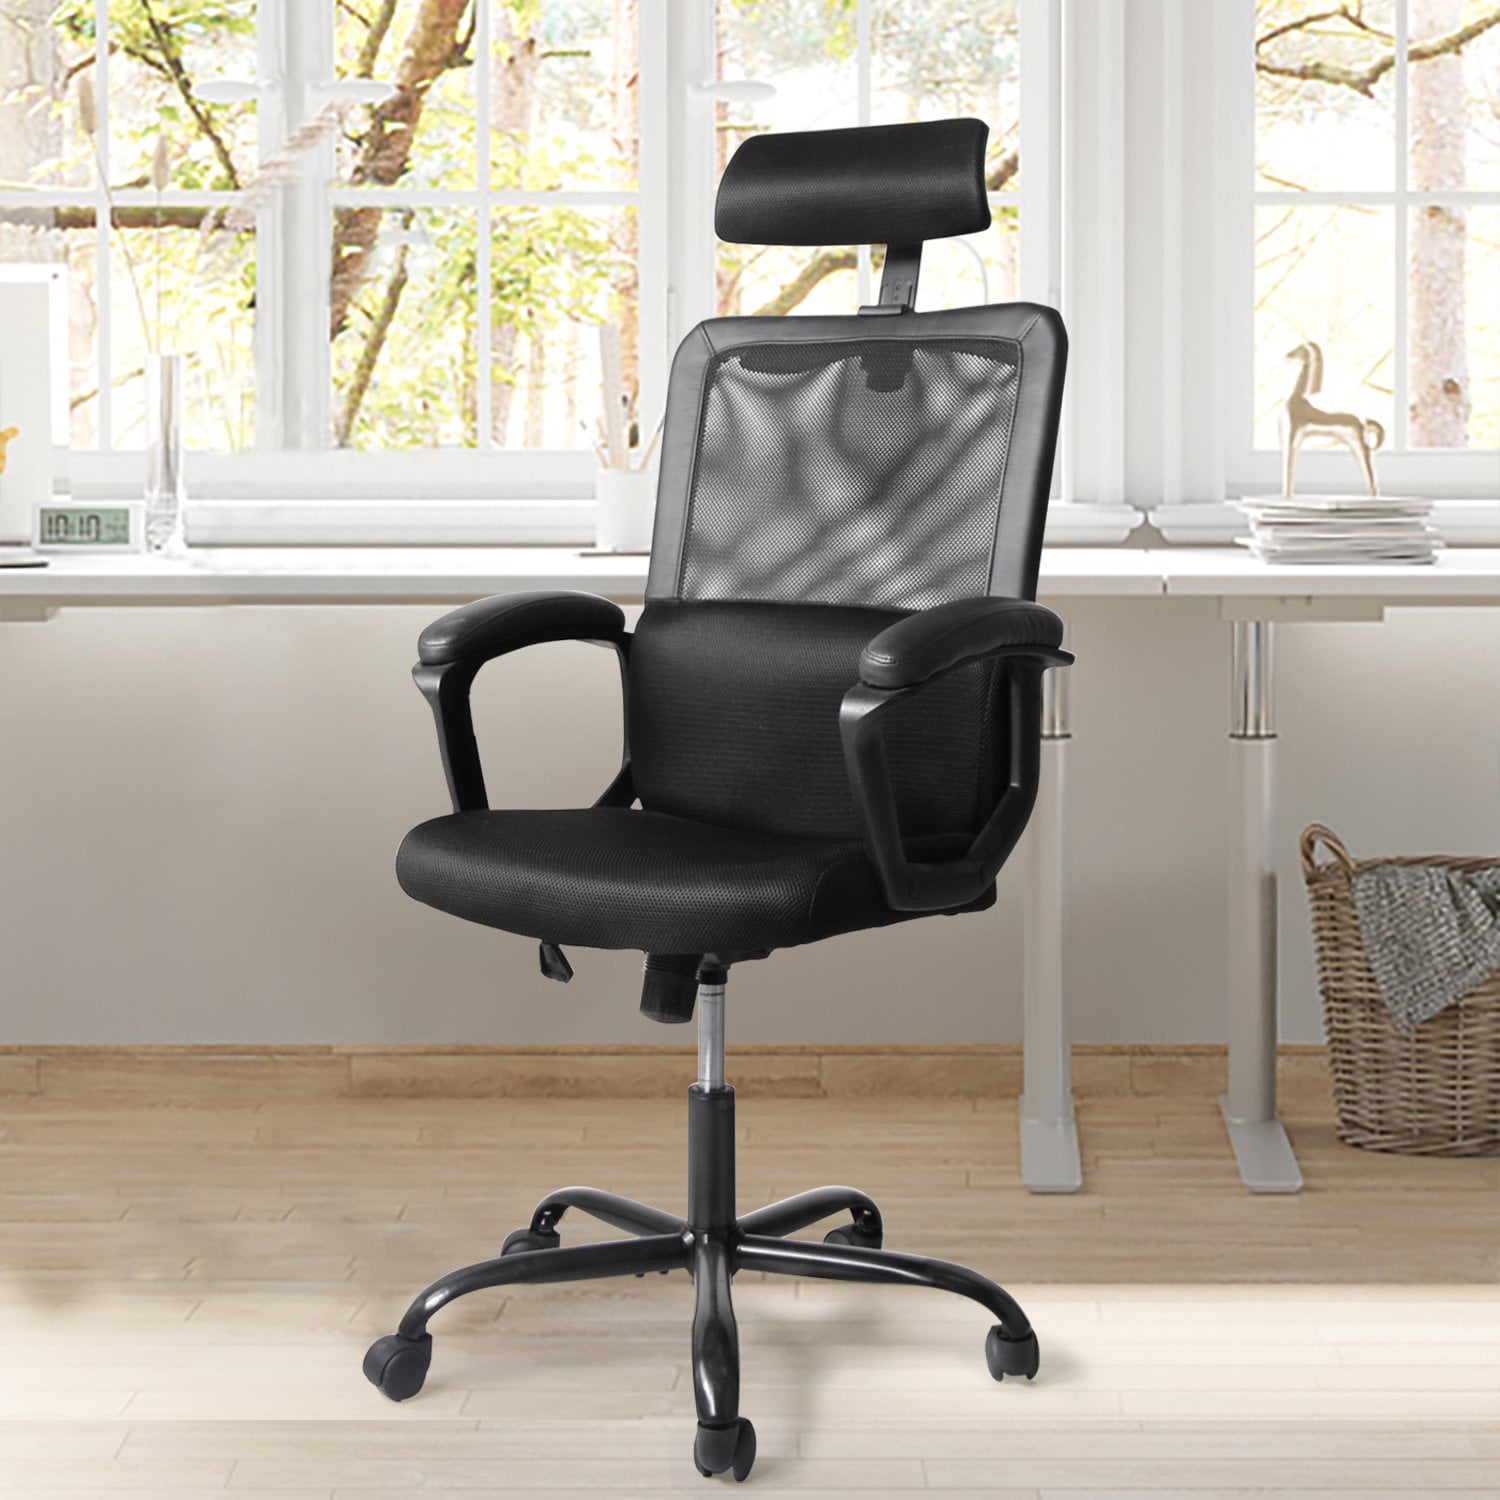 BLACK MESH COMPUTER OFFICE DESK CHAIR WITH CHROME ARMS 